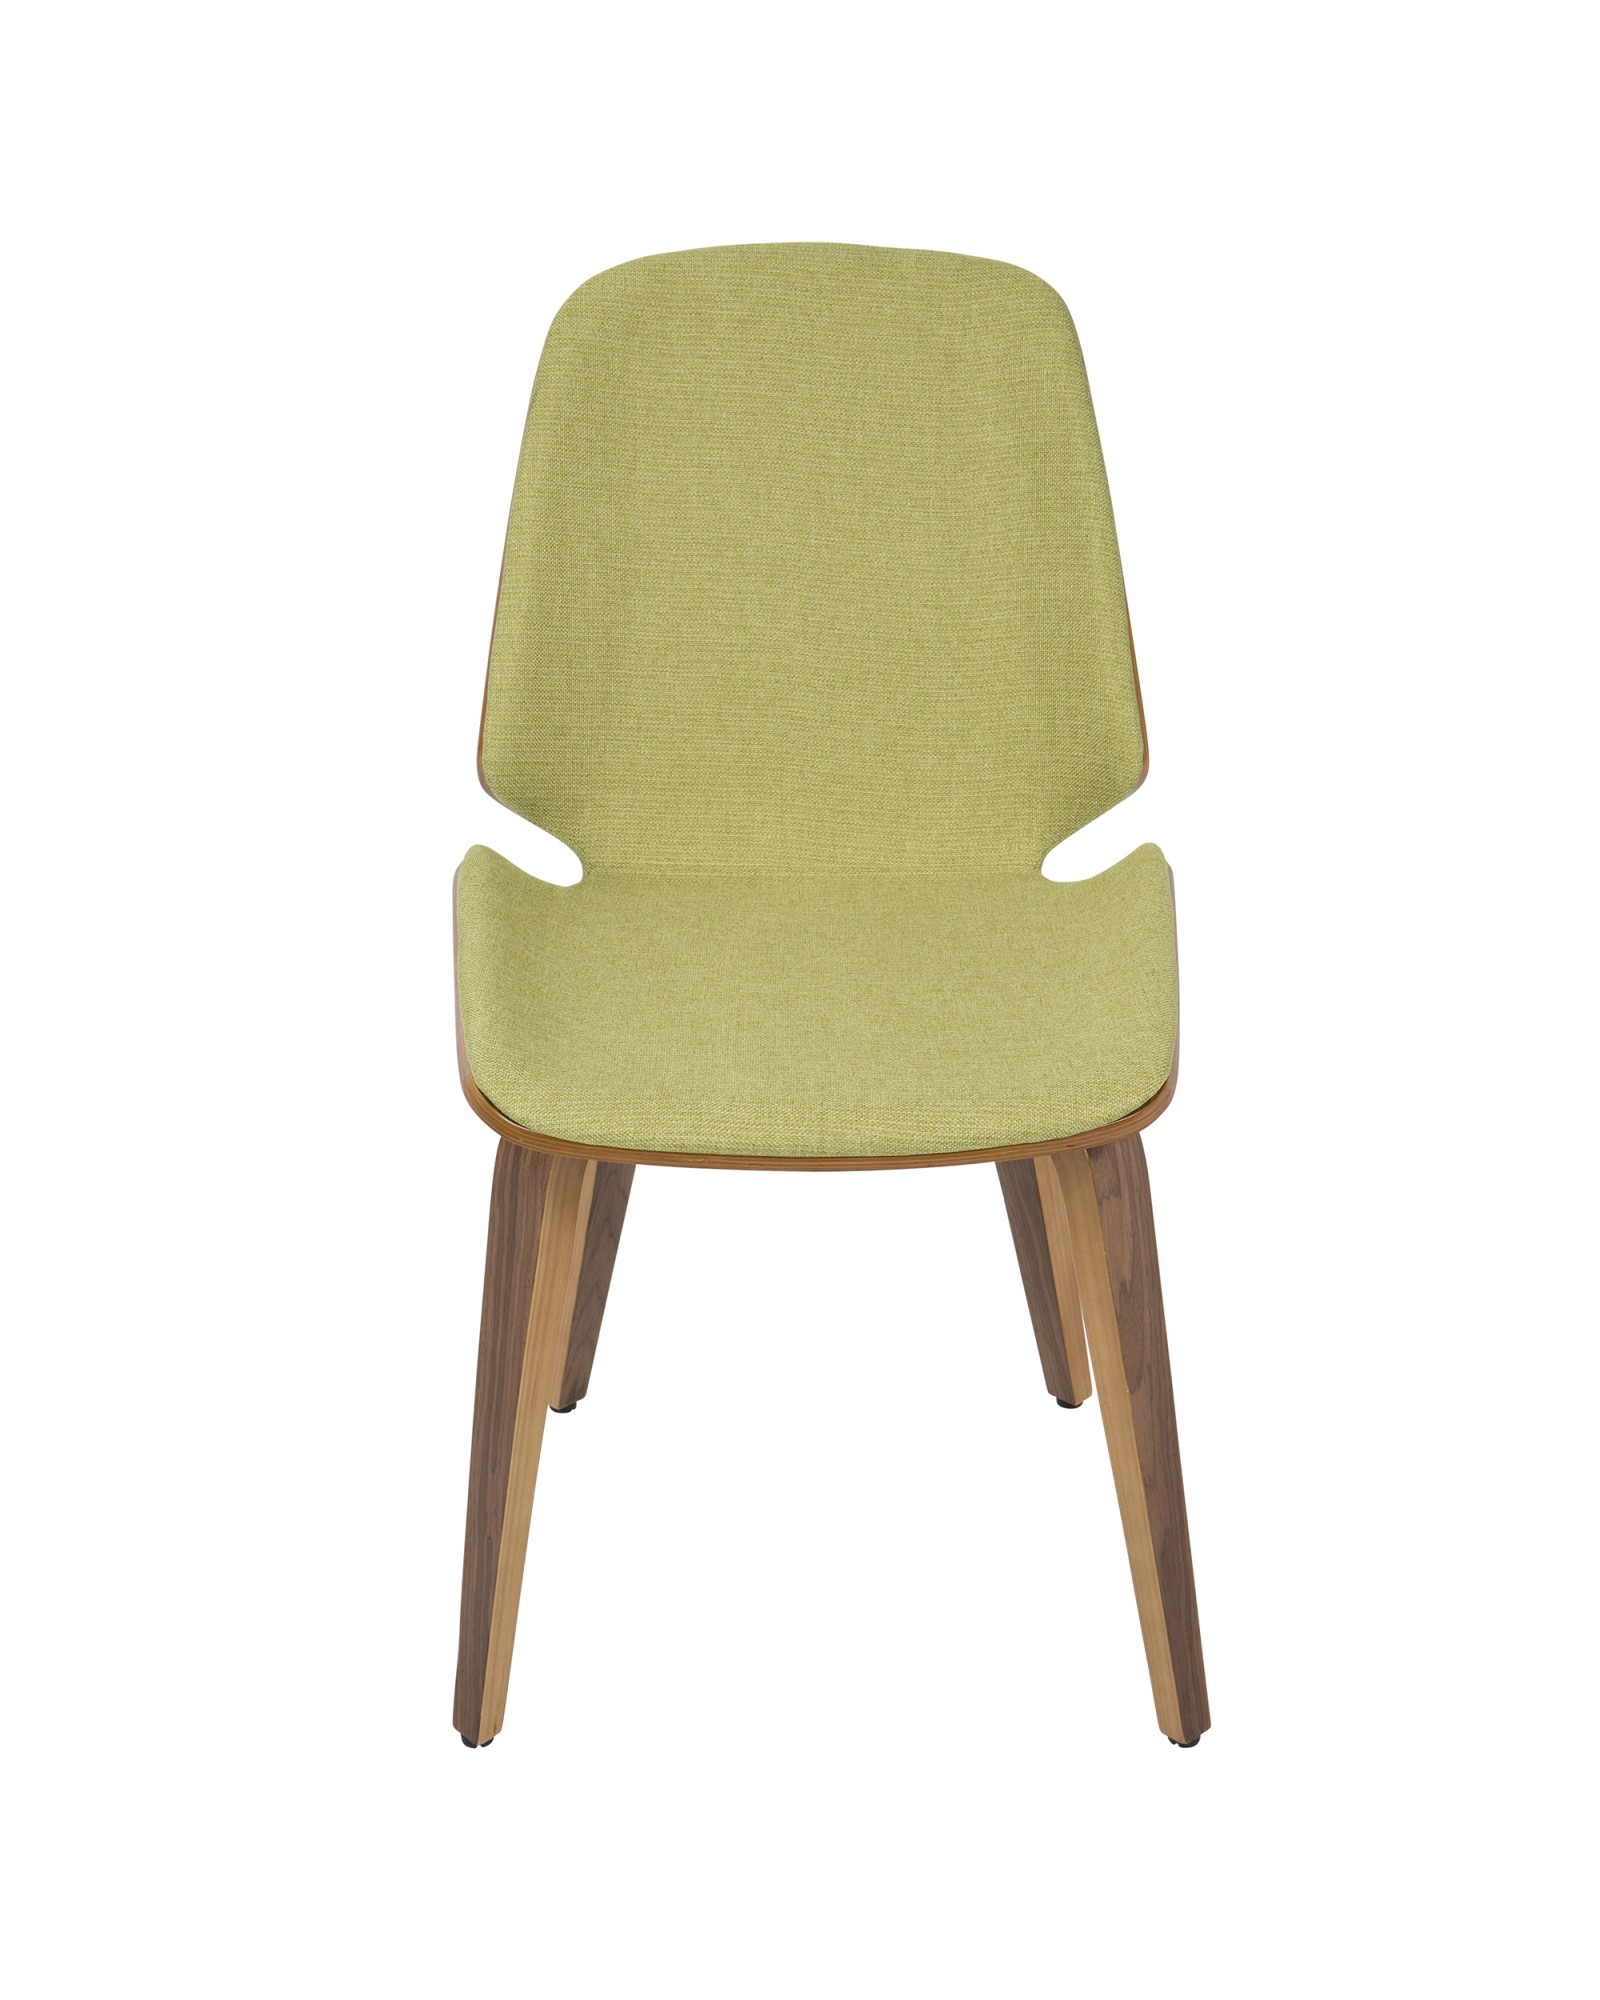 Serena Mid-Century Modern Dining Chair in Walnut with Green Fabric - Set of 2